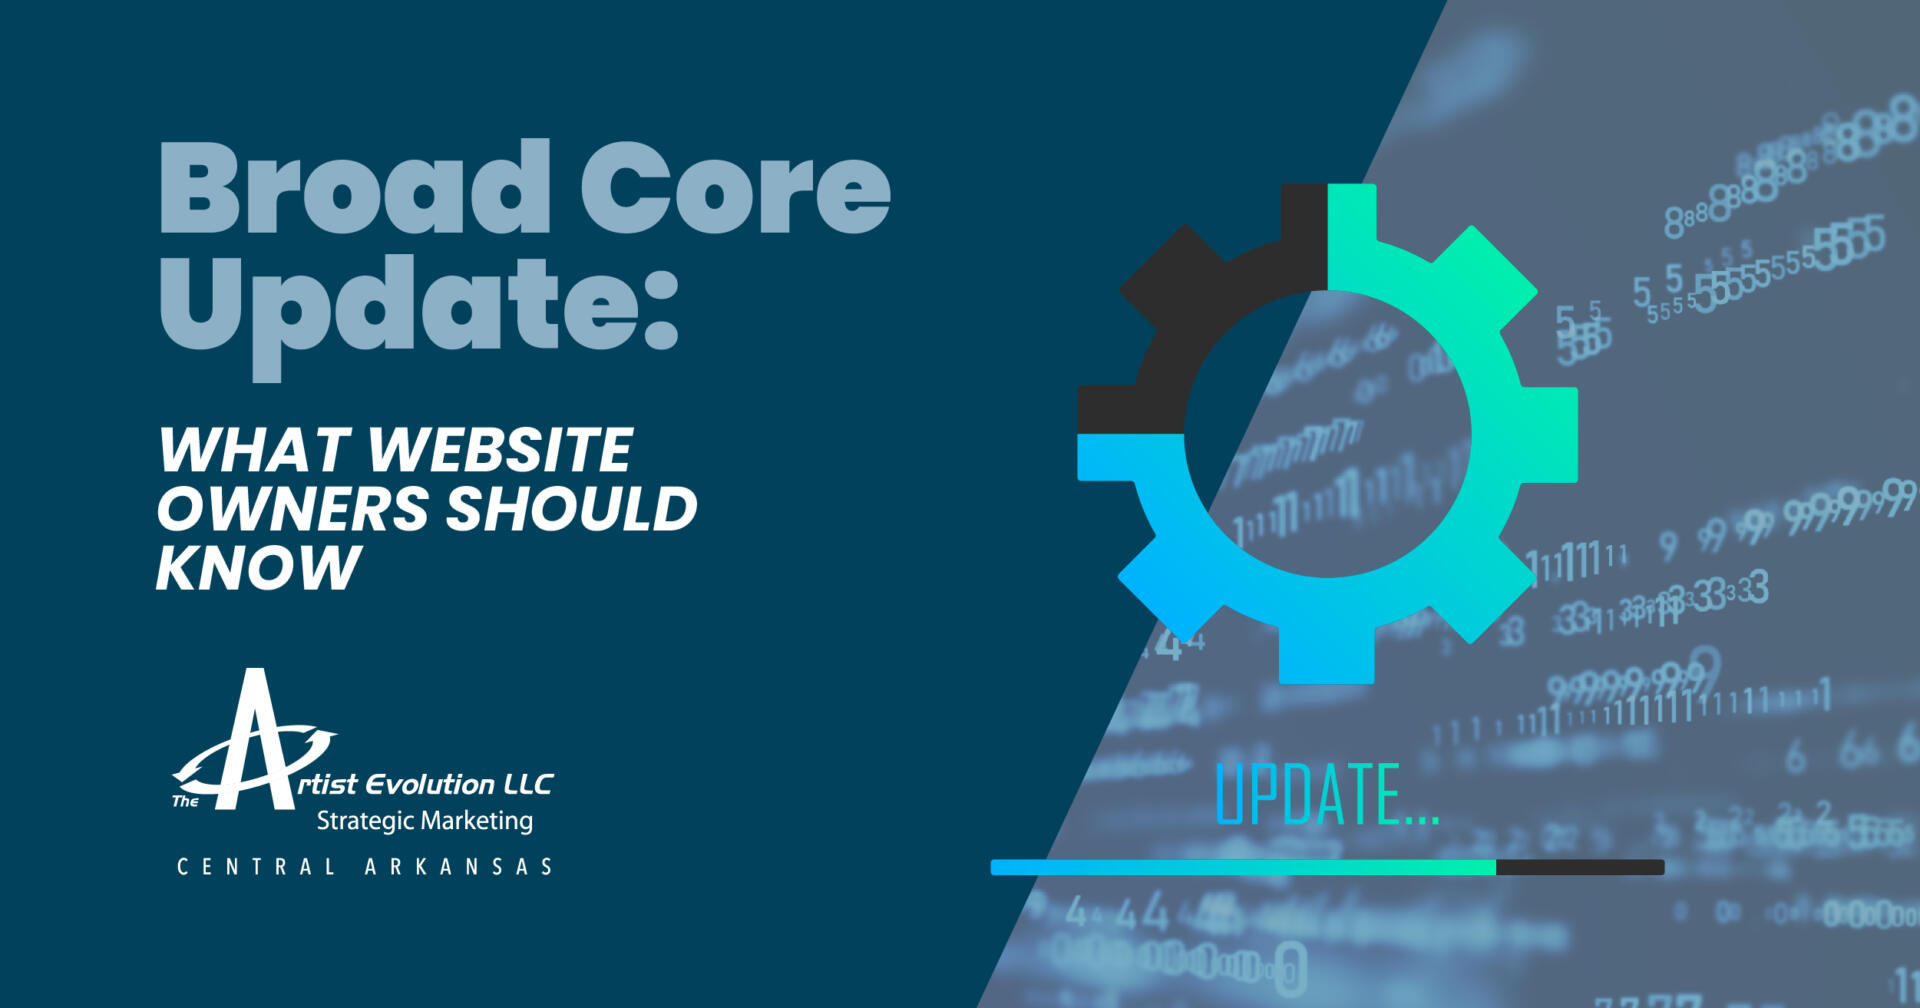 Broad Core Update: What Website Owners Should Know